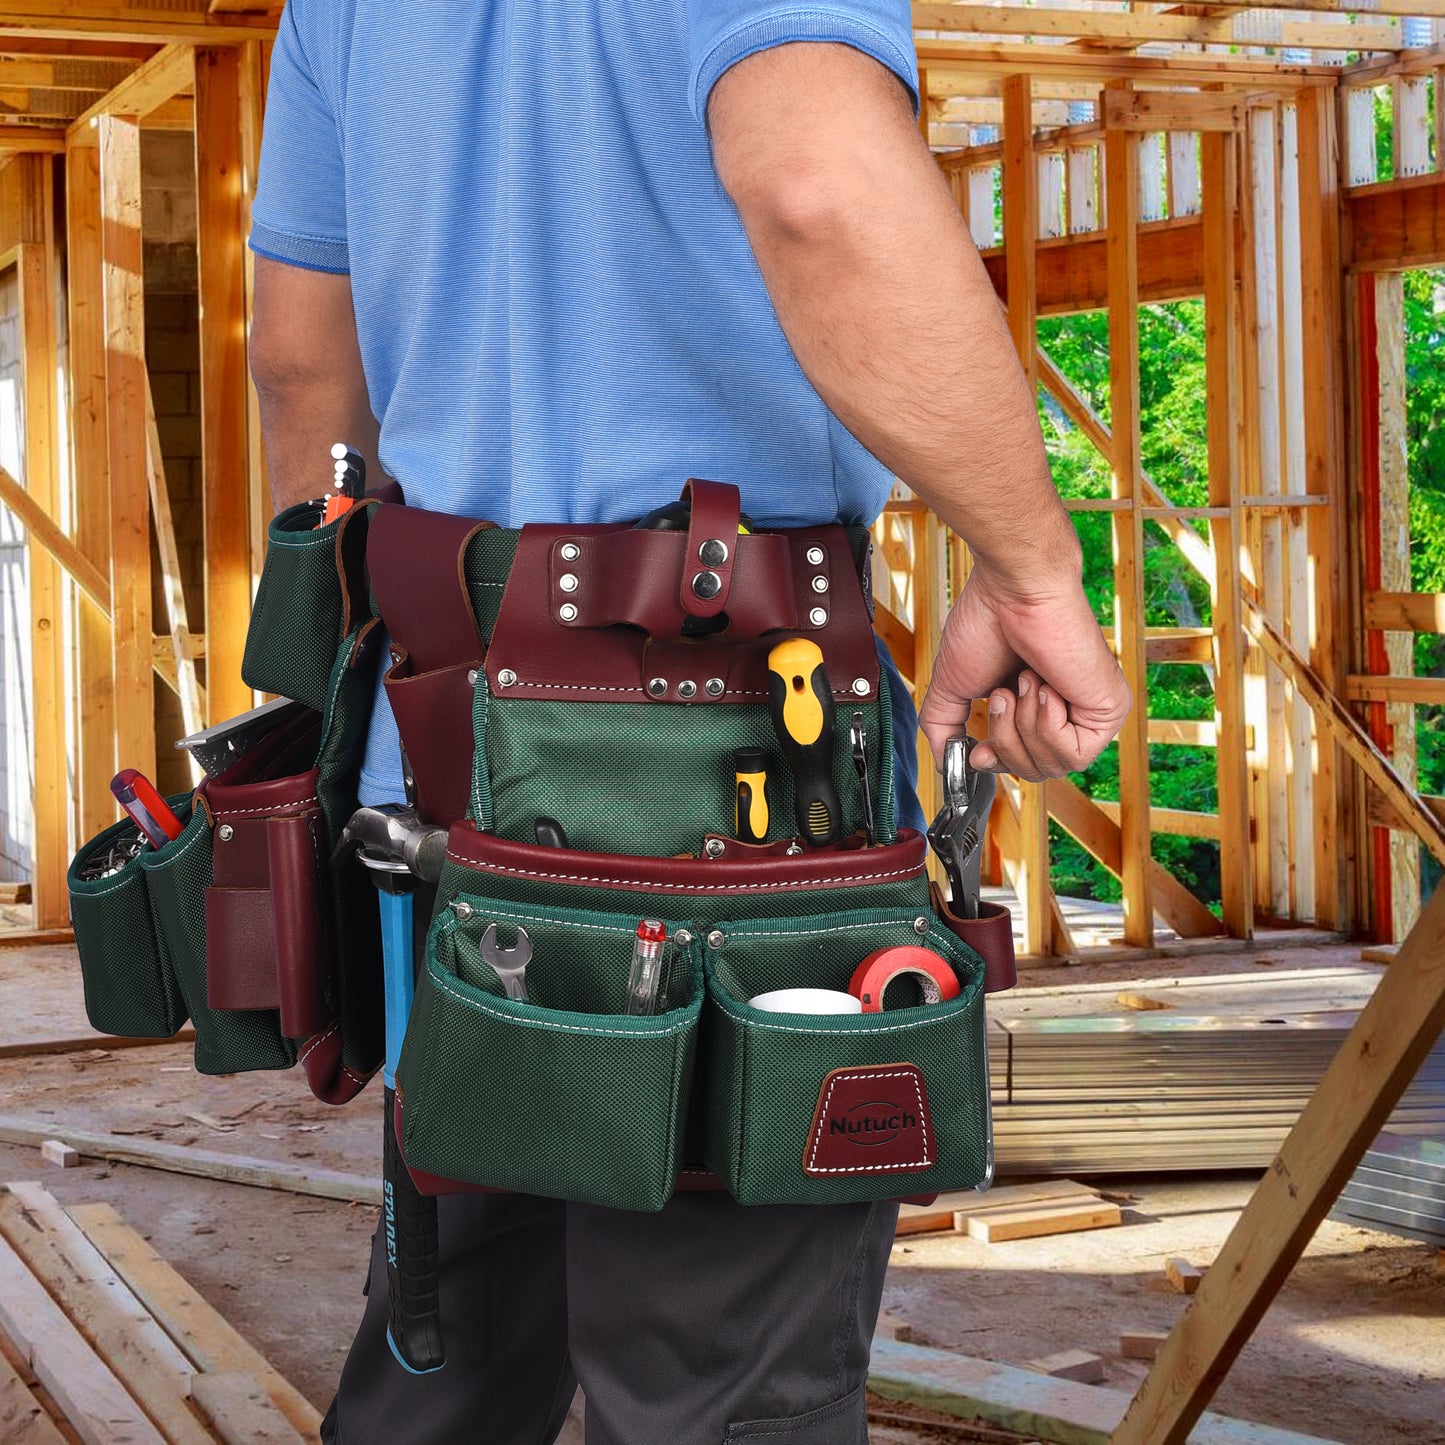 NUTUCH Green Heavy Duty Nylon and Leather Tool Belt | Framing Tool Bags | Nylon Tool Pouch | Carpenter Tool Belt | Electrician Tool Belts | NT-1110-R